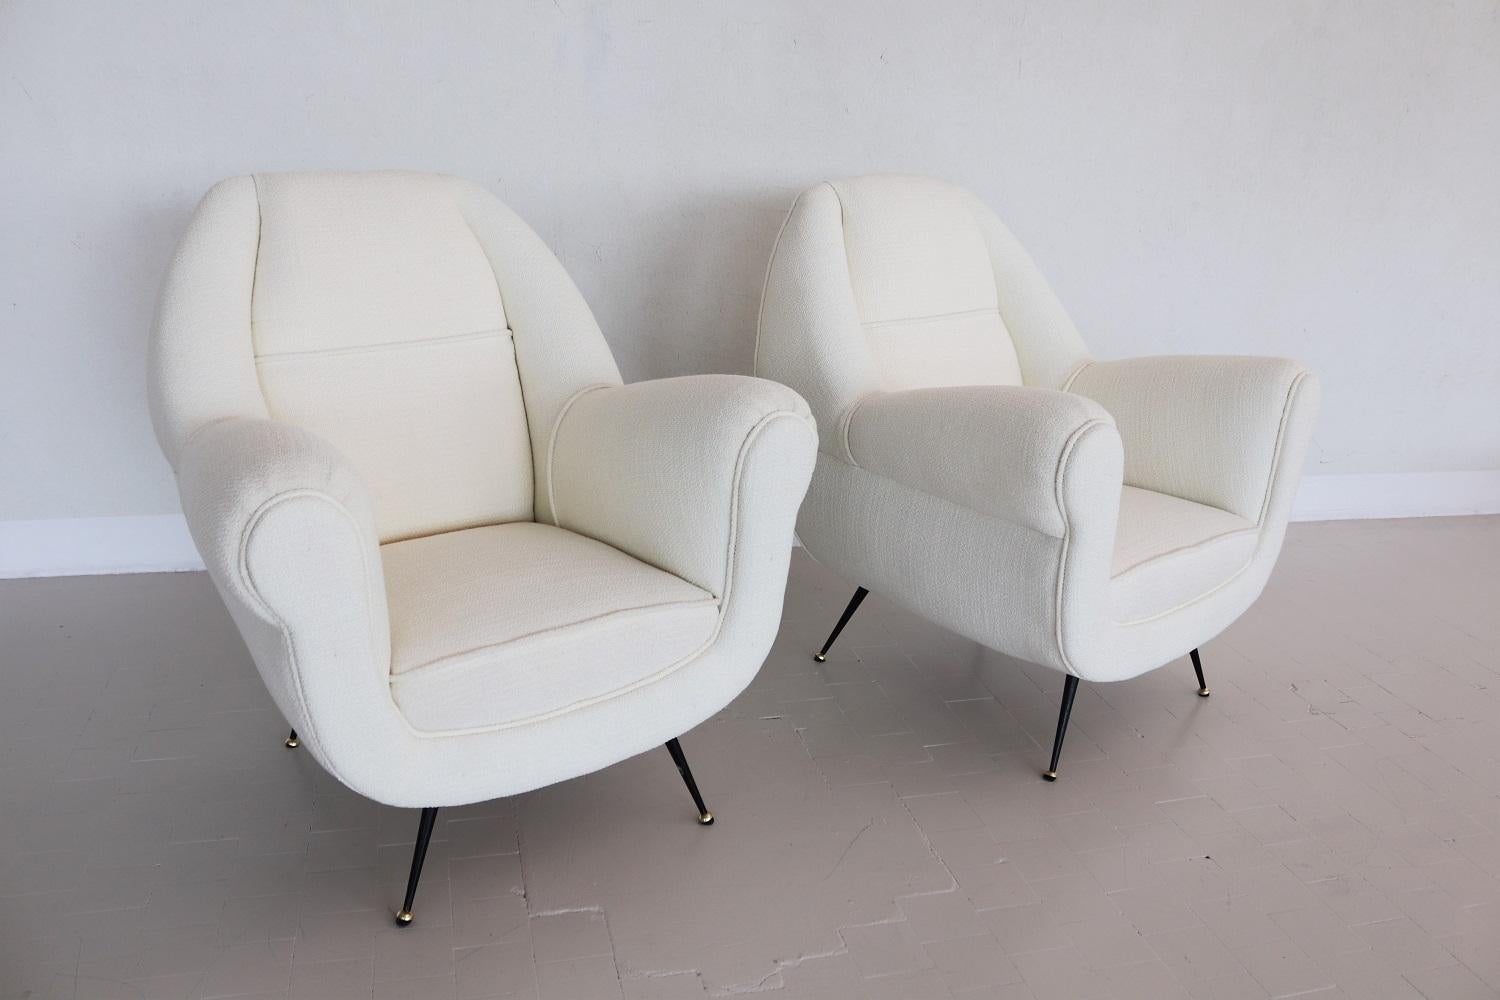 Italian Midcentury Armchairs in White Upholstery and Brass Stiletto Feet, 1960s For Sale 10